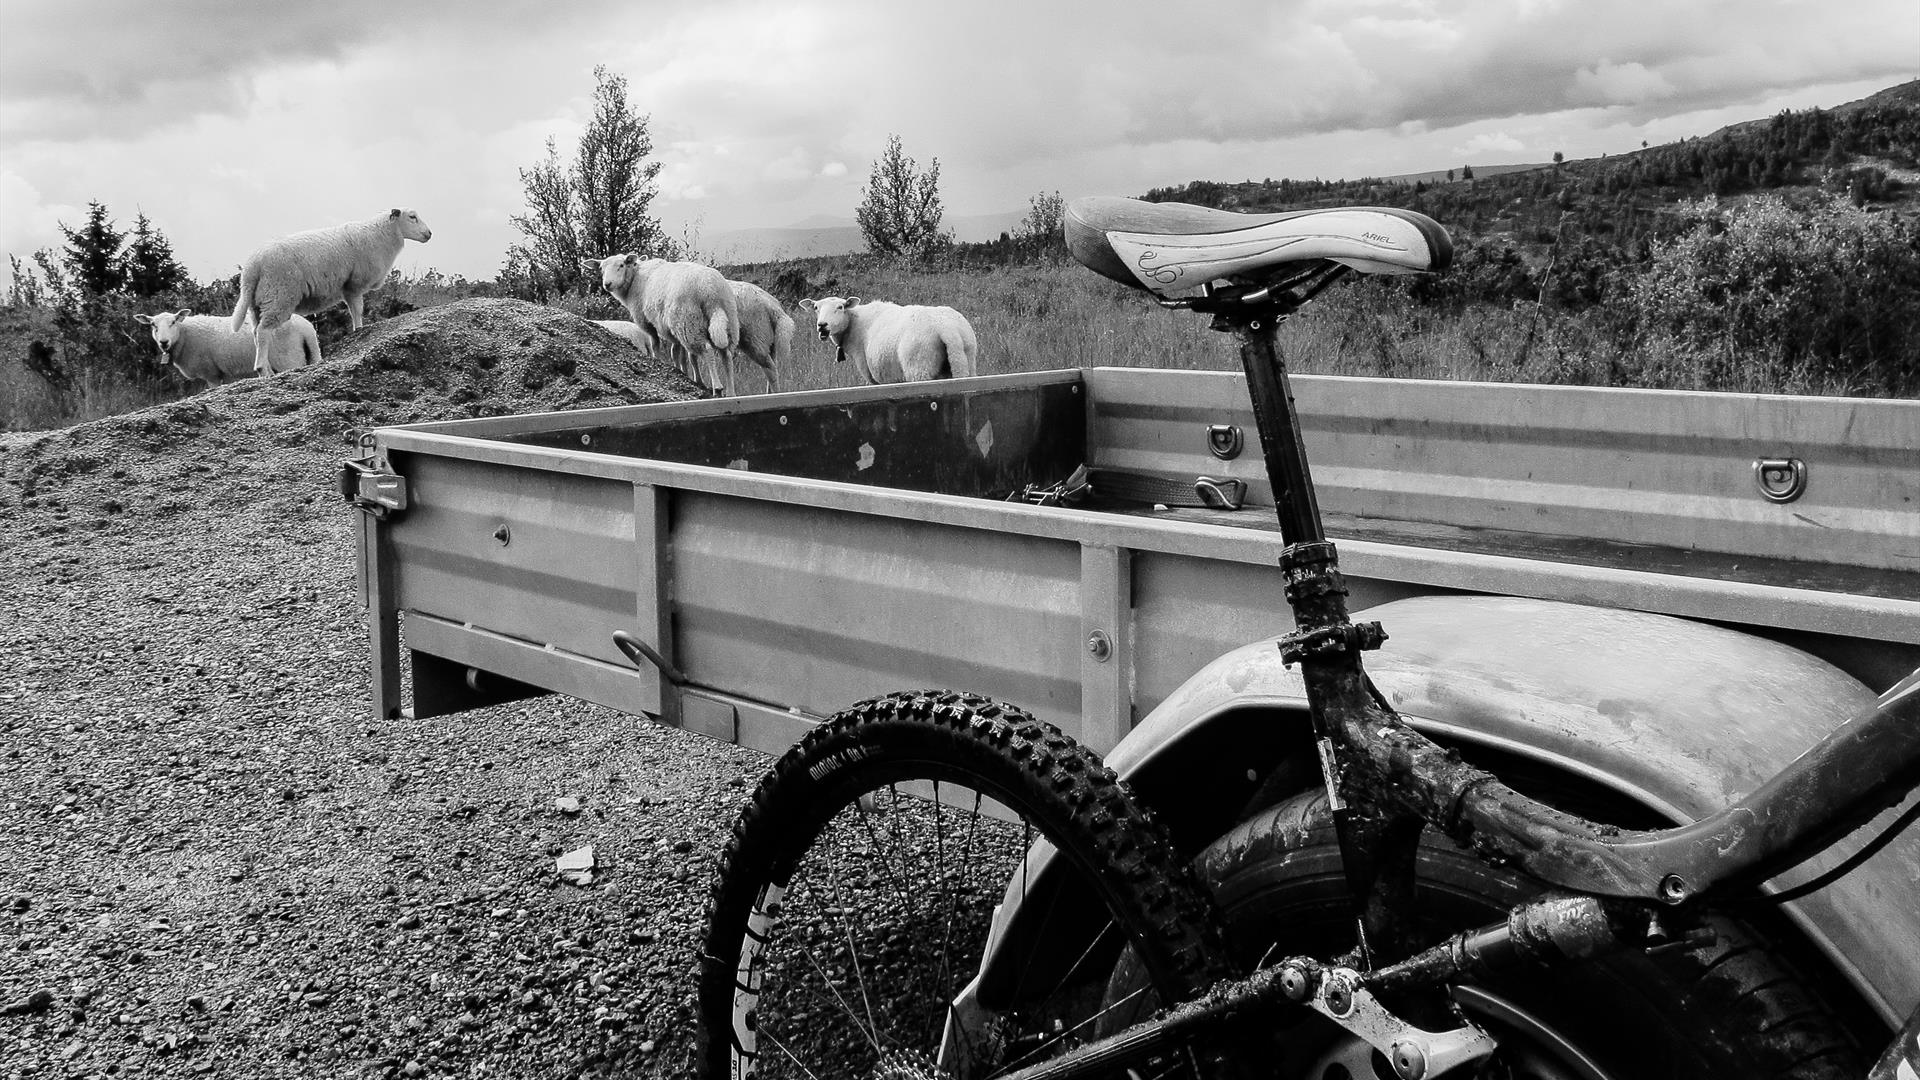 Bike leaned against railings with sheep in the background.